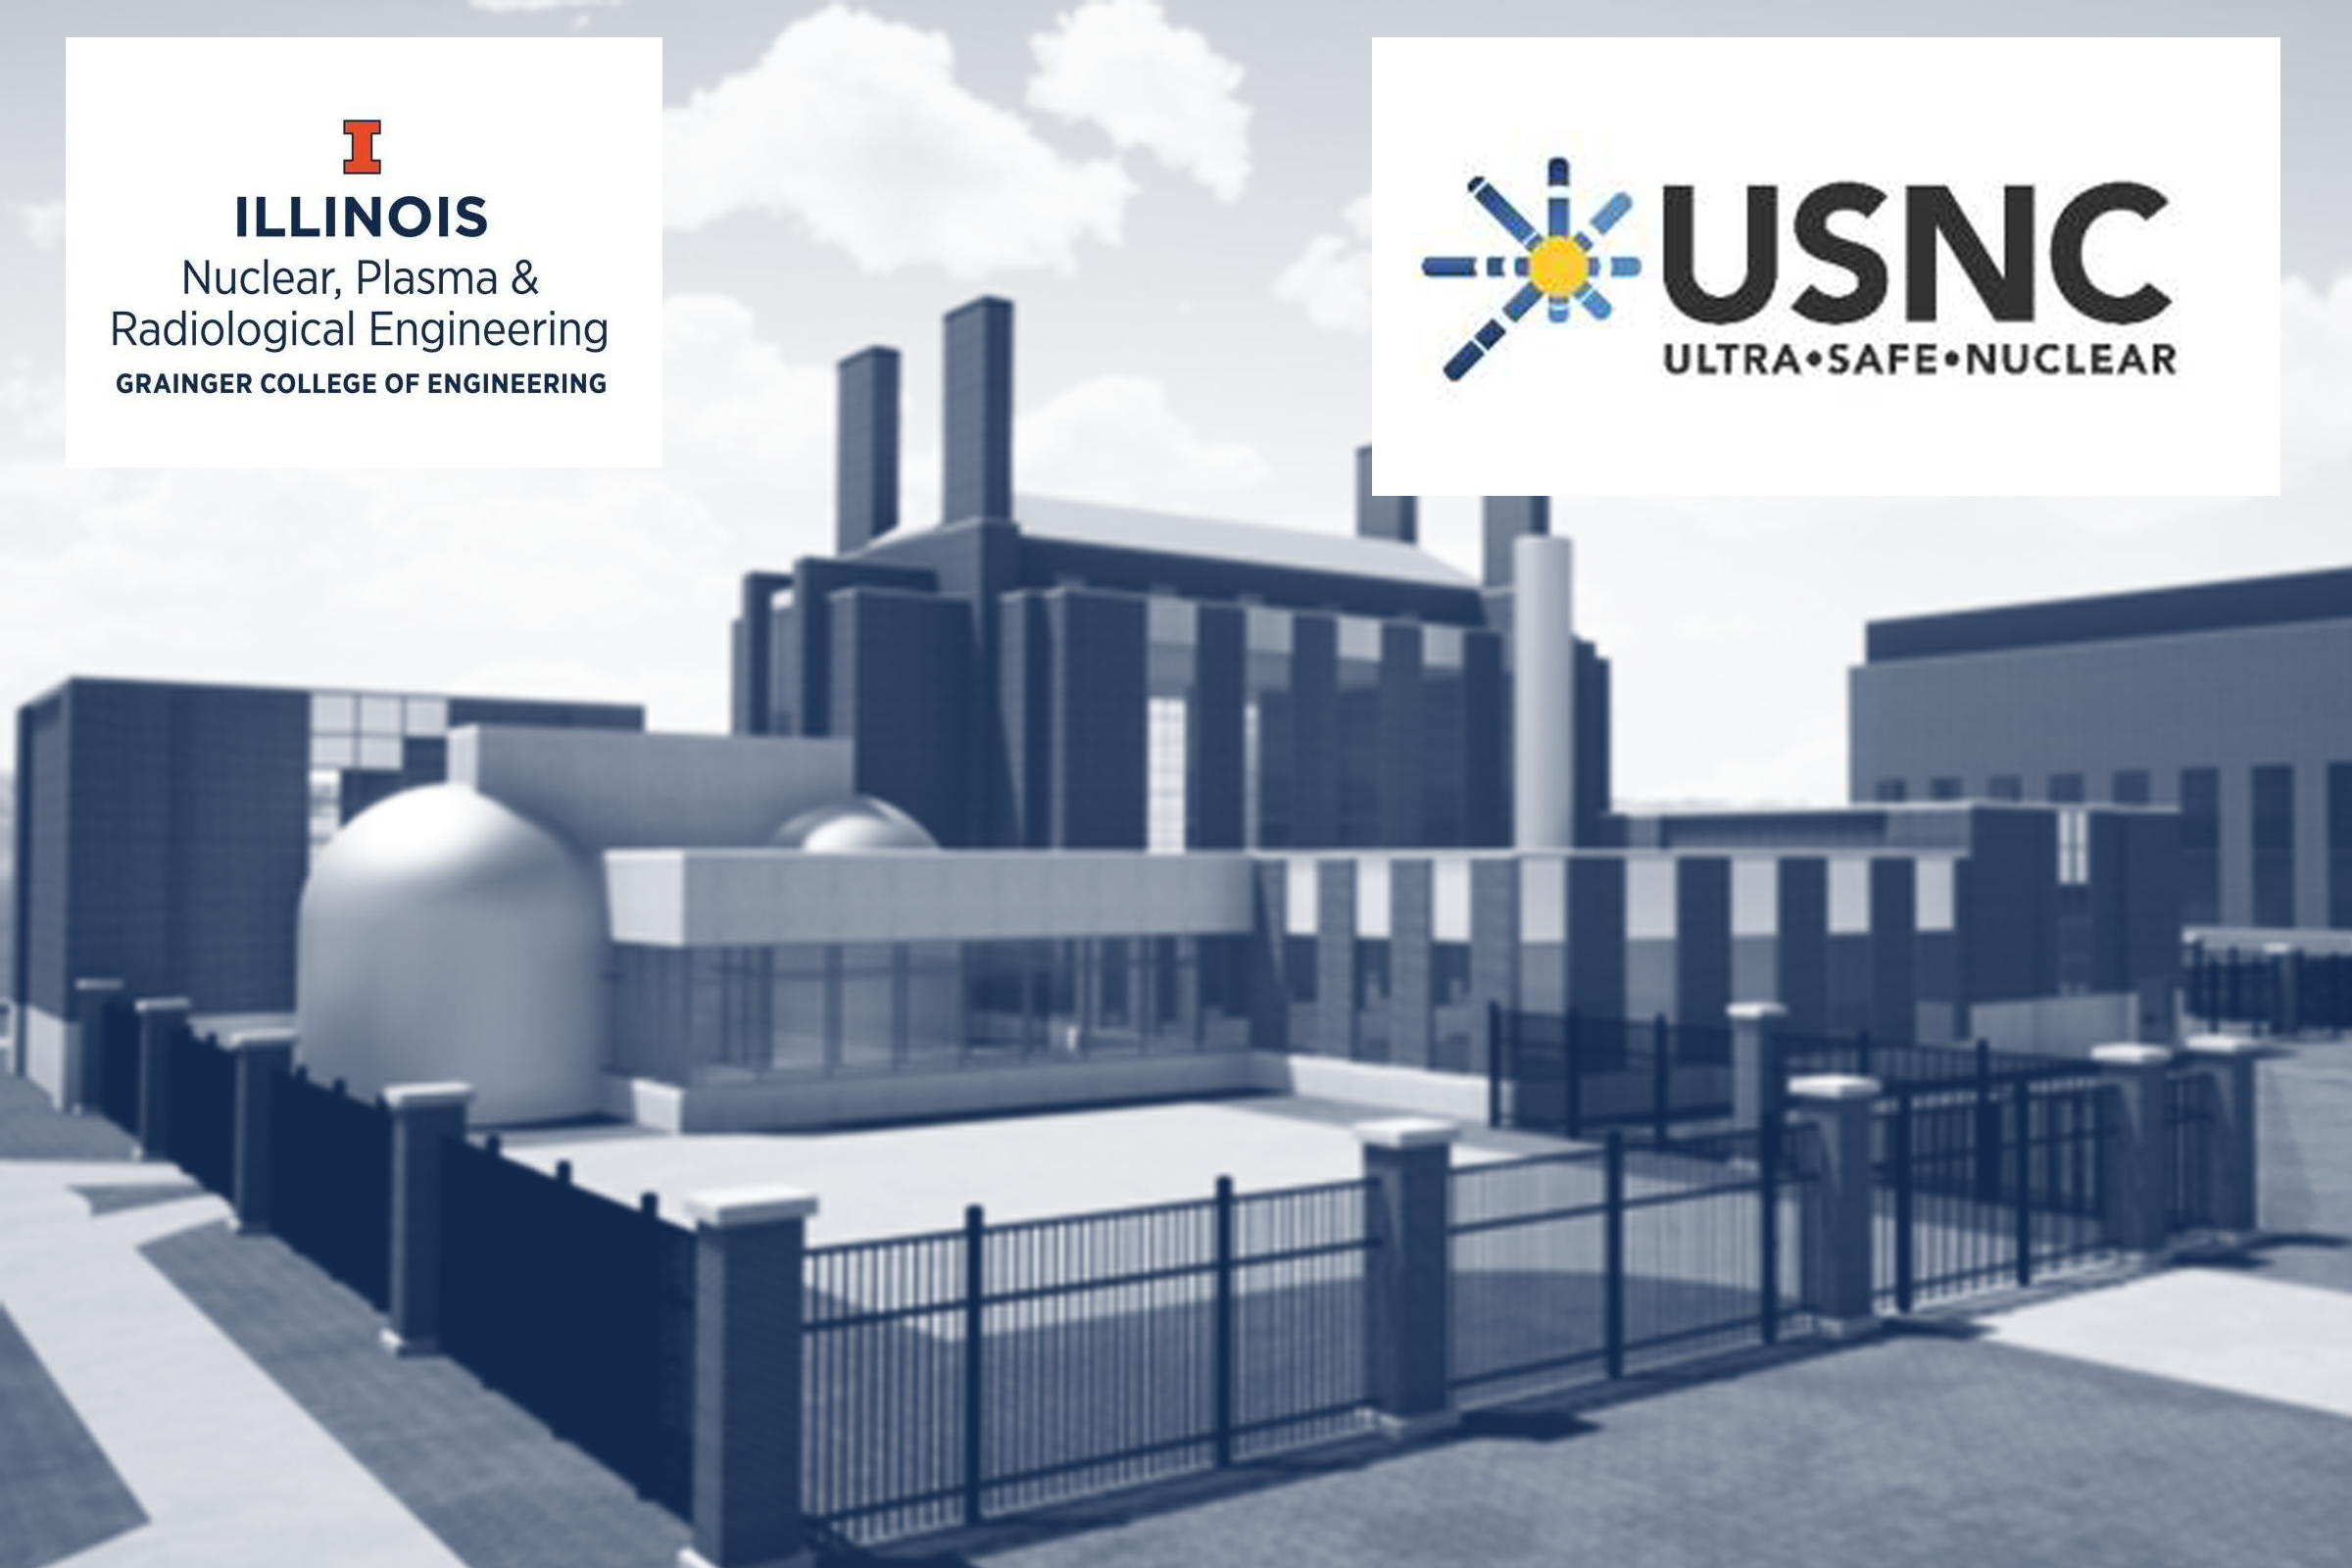 UIUC submits Letter of Intent to the U.S. Nuclear Regulatory Commission to apply for micro-reactor license